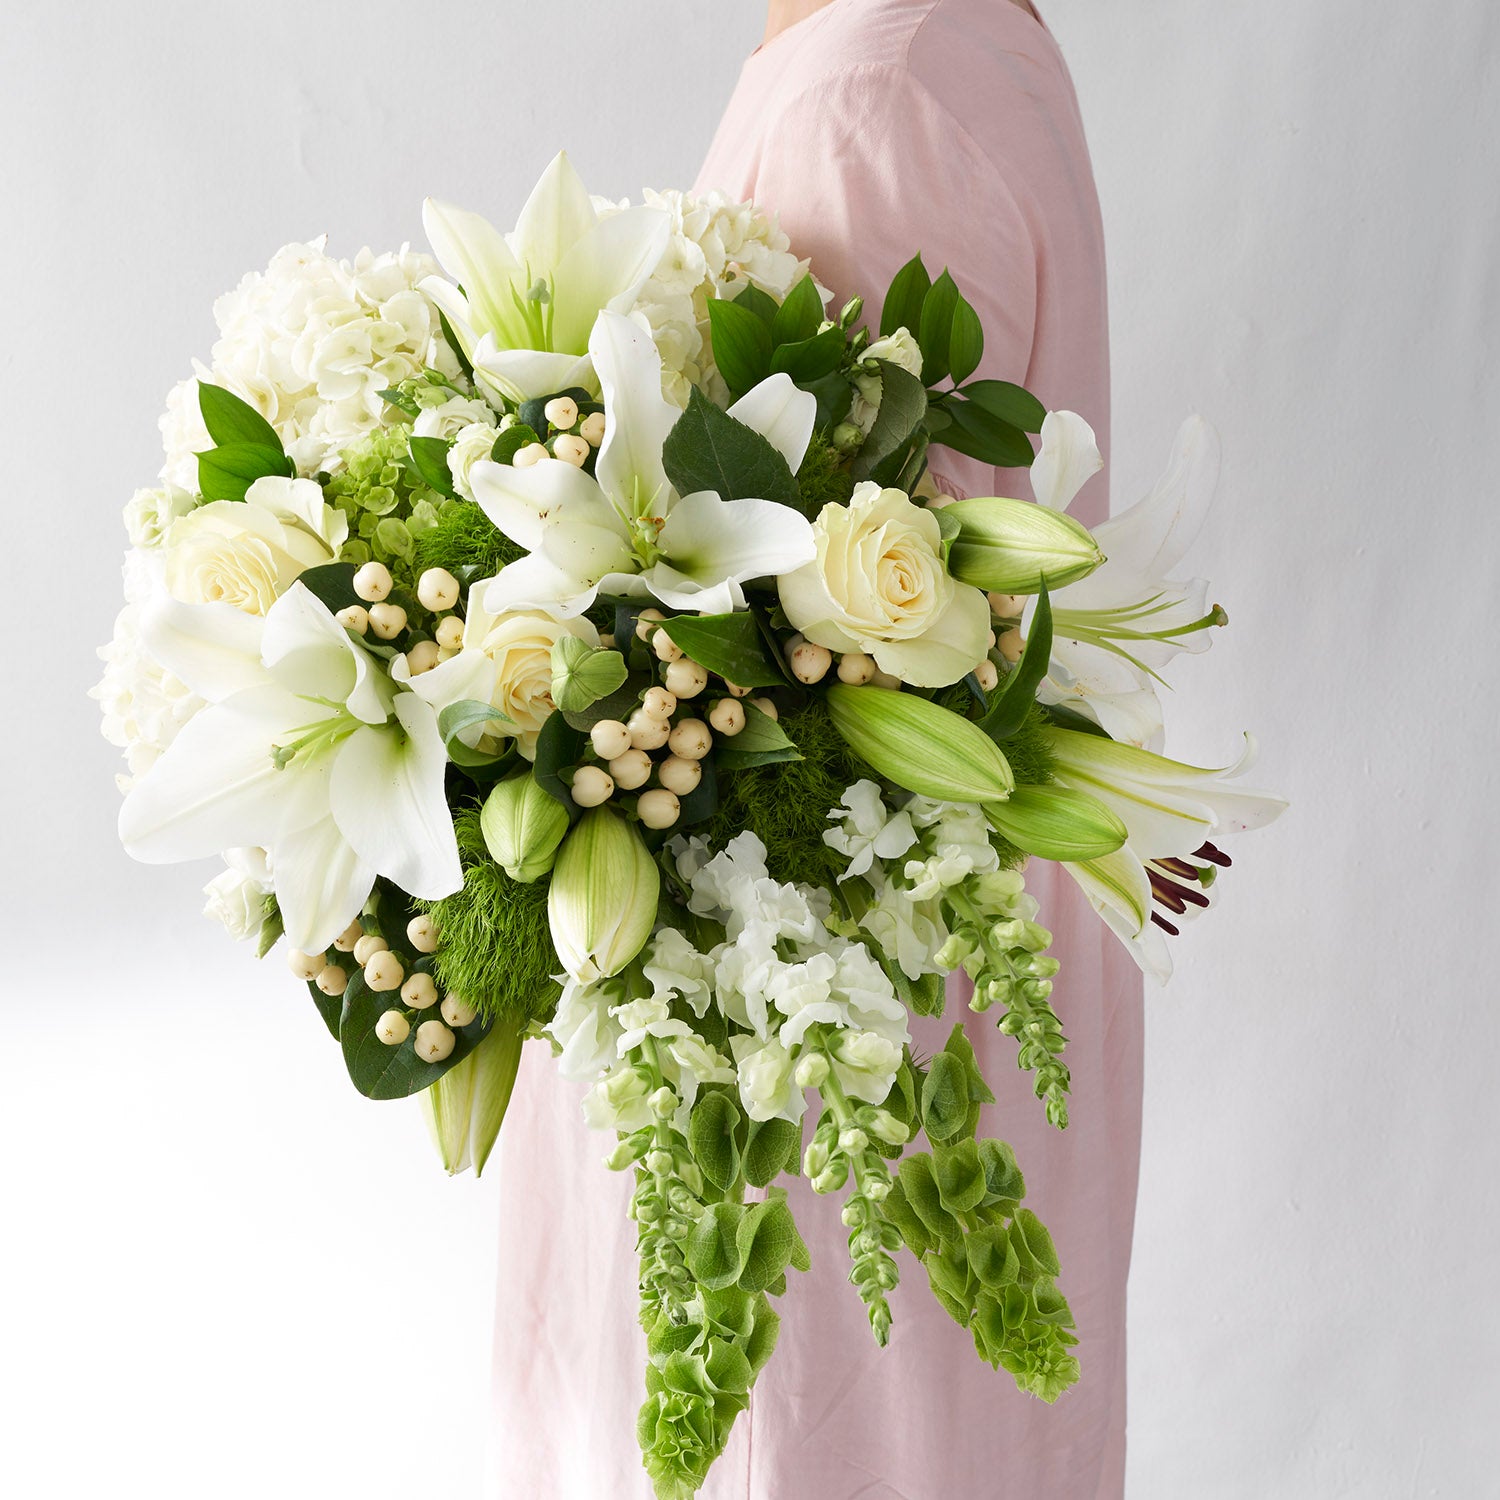 Woman in pink dress holding large bouquet of white flowers, including lilies, roses, bells, snapdragons and hydrangea.